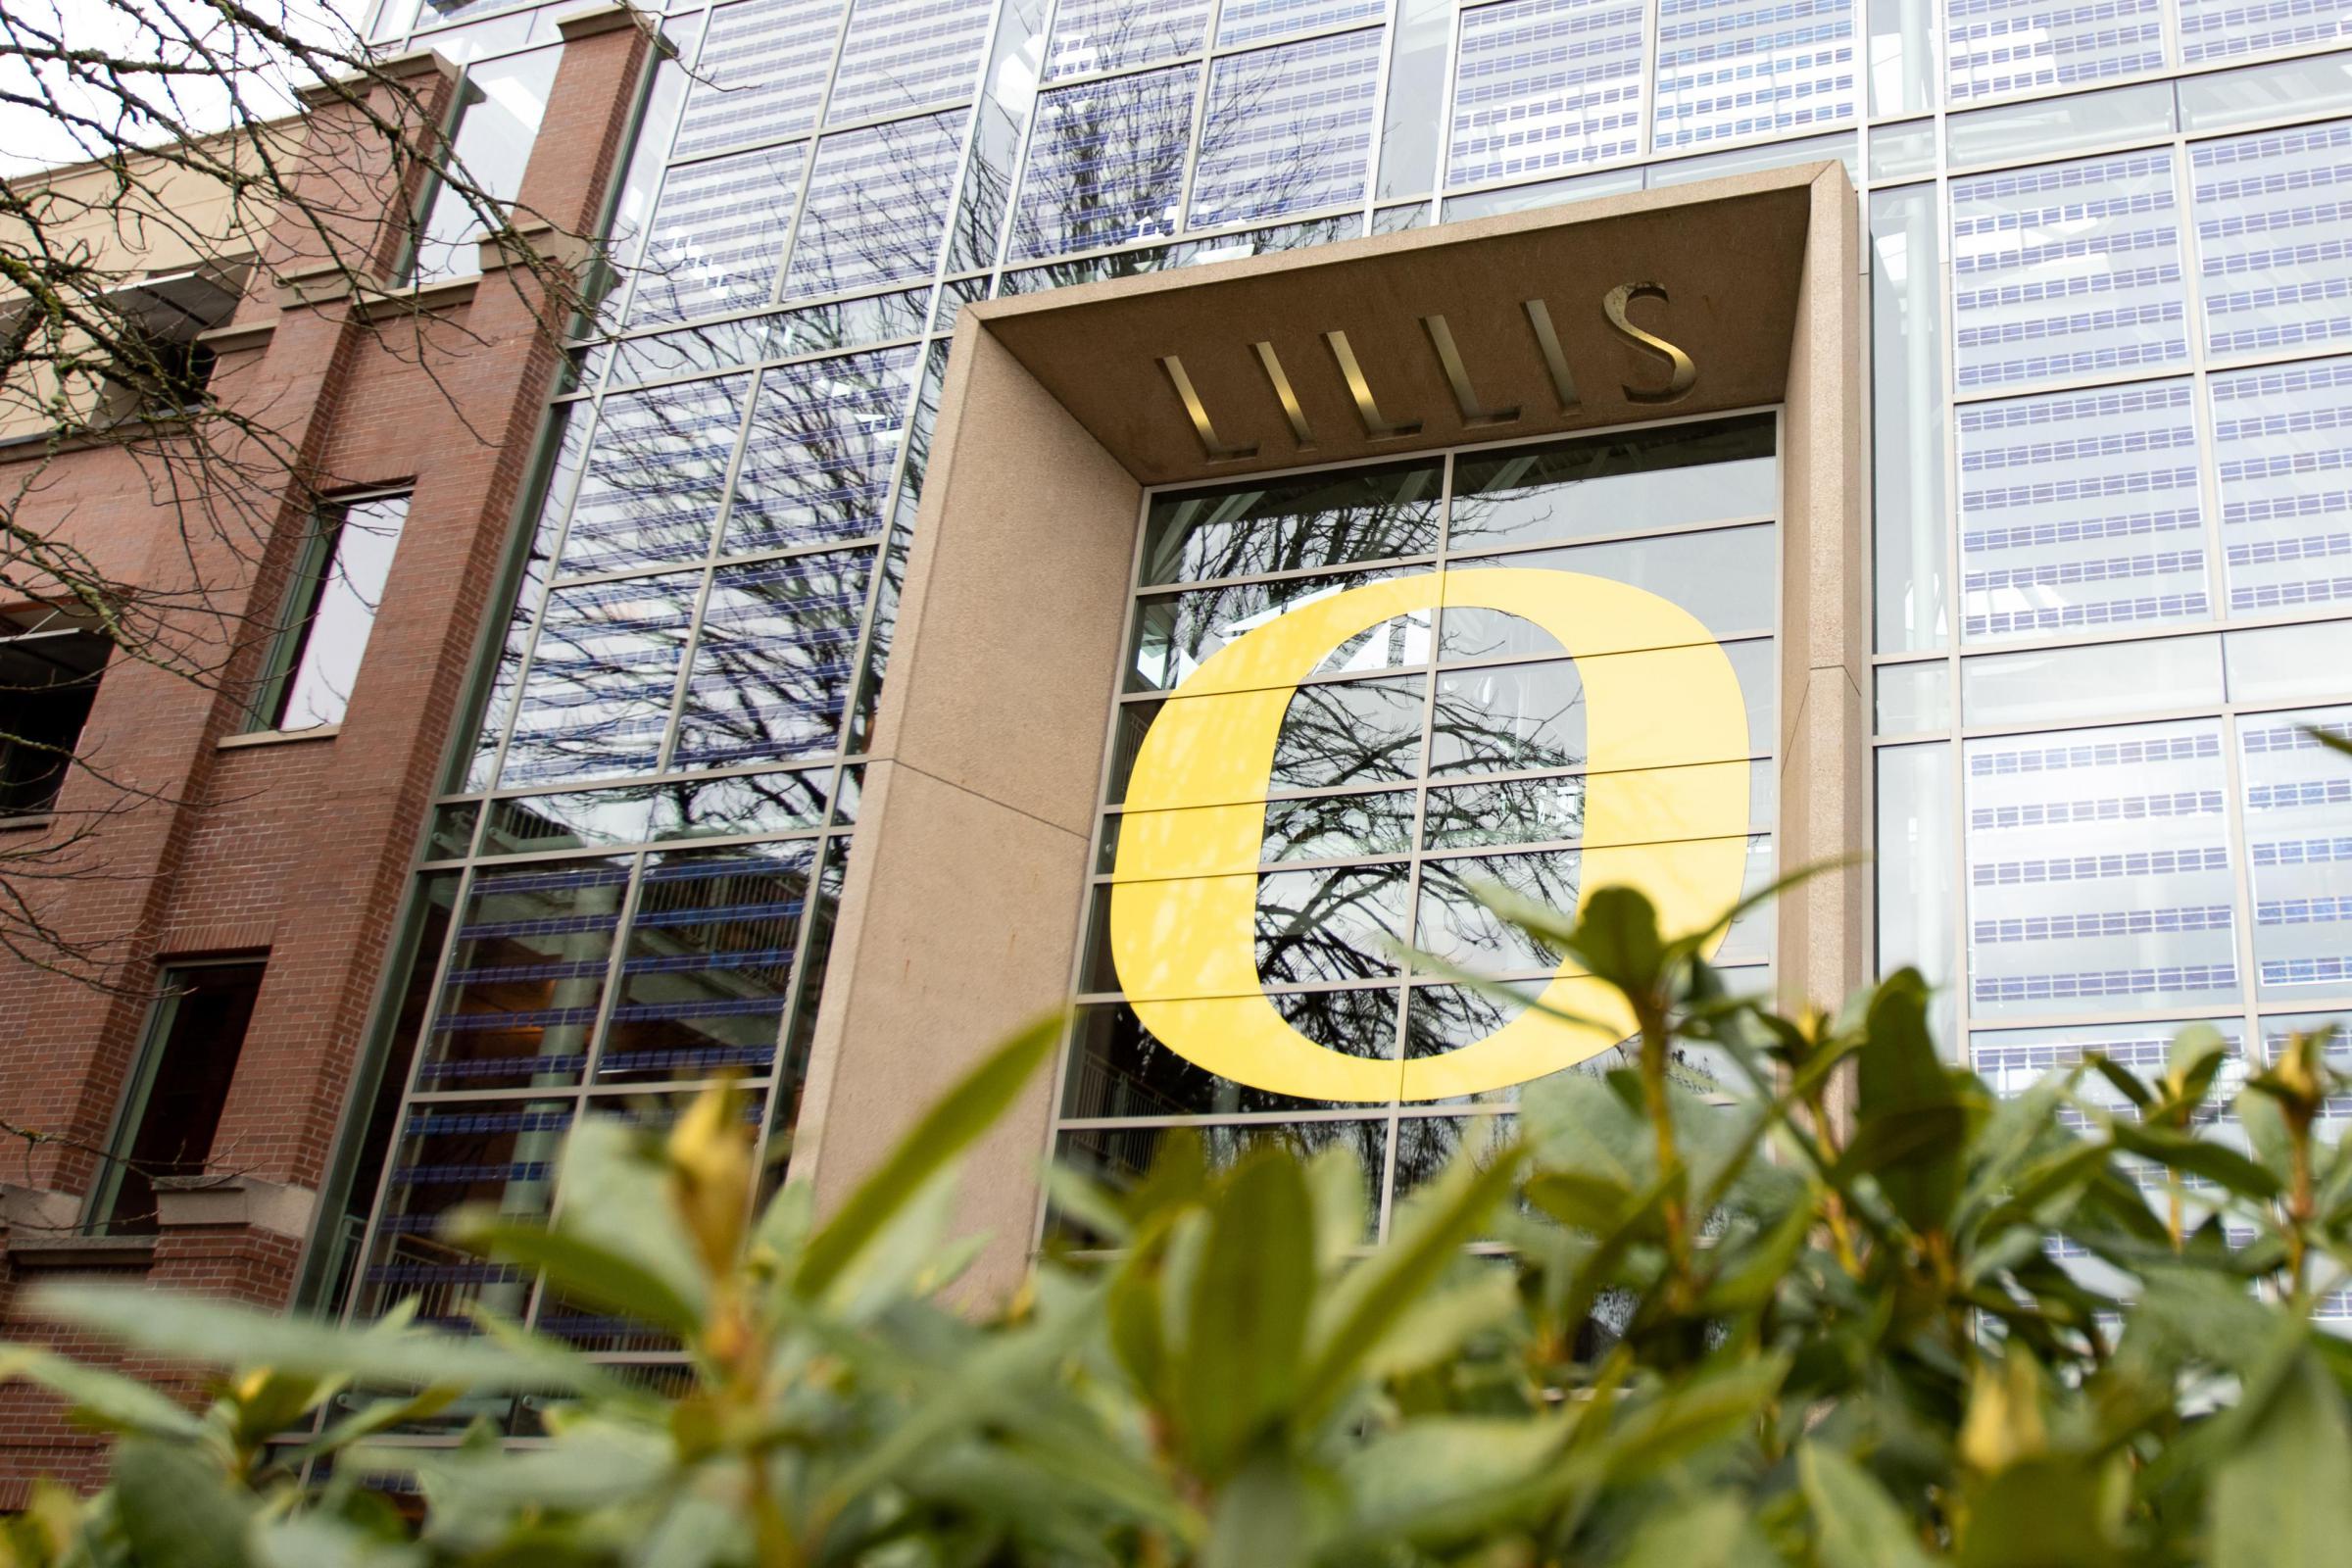 students-sue-oregon-state-university-of-oregon-requesting-tuition